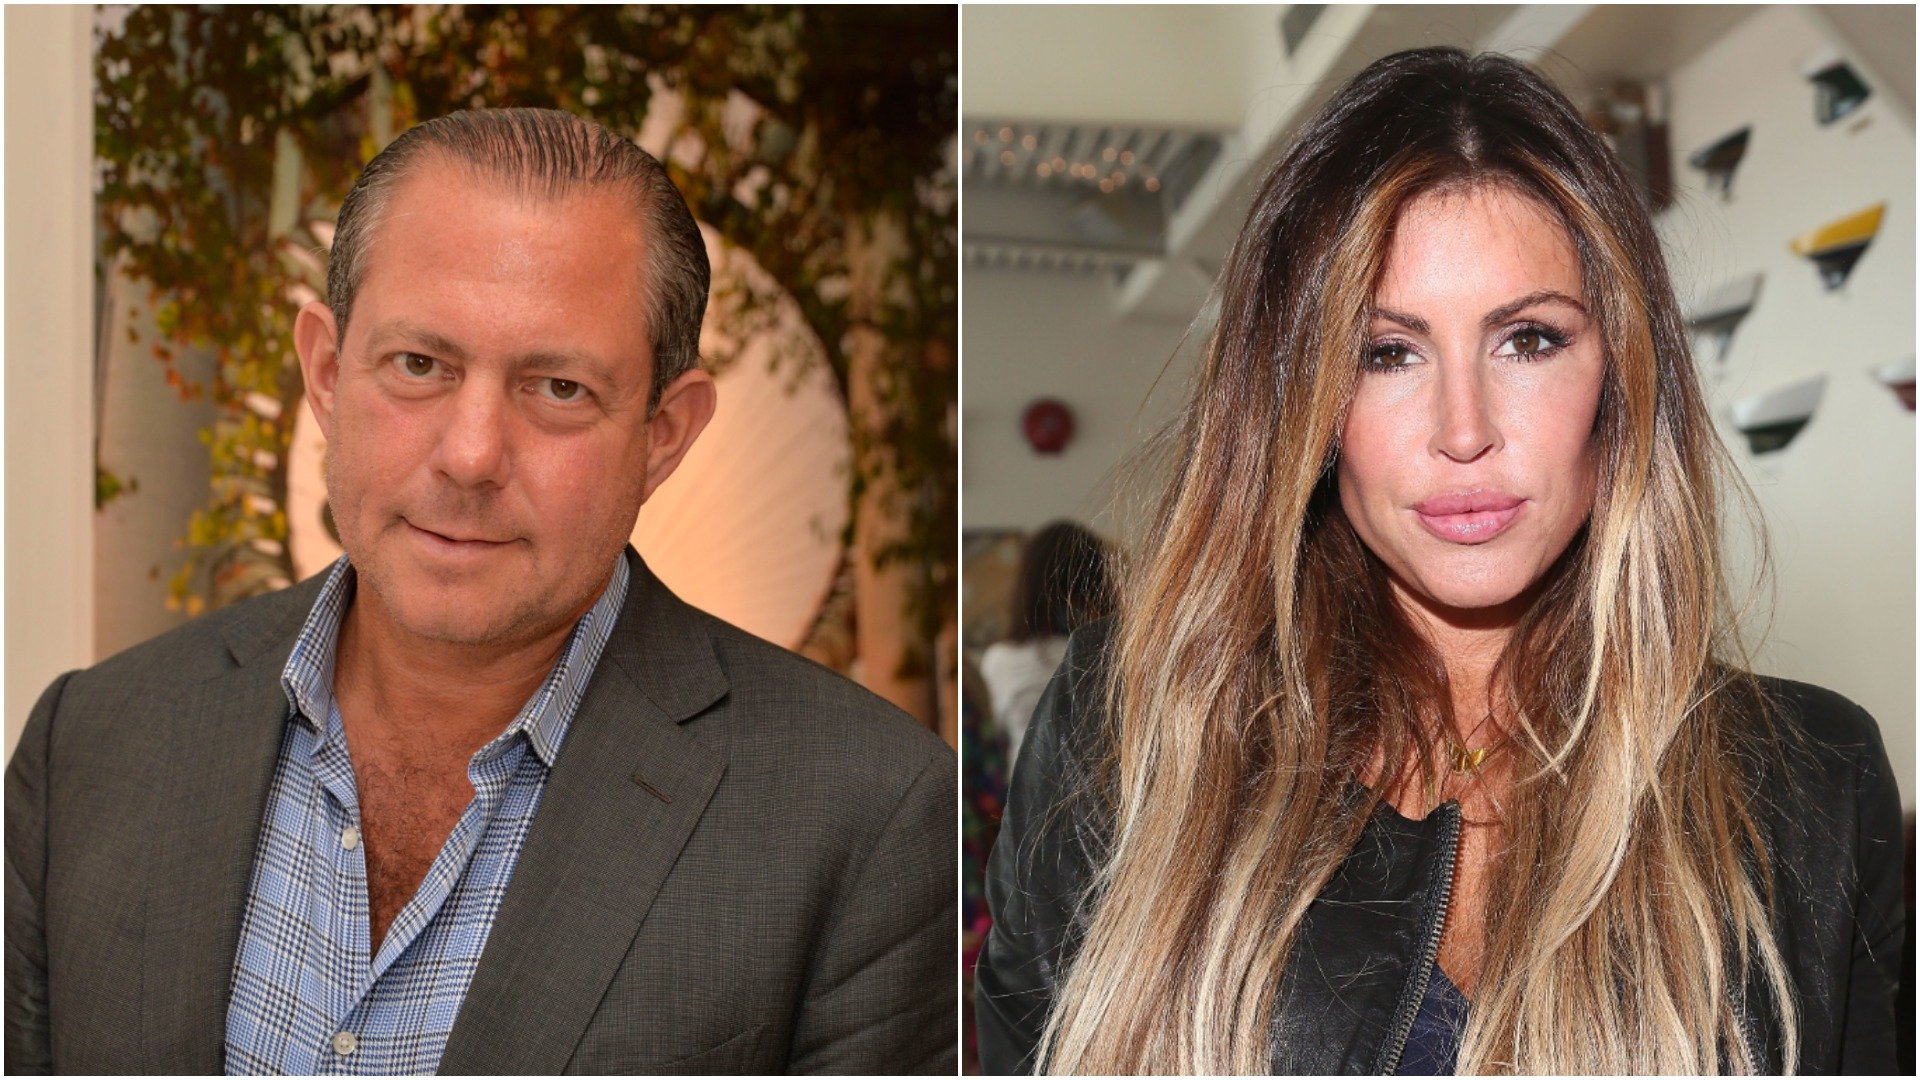 RHONY's Harry Dubin was spotted with Rachel Uchitel and an insider believes she could be the cast shakeup the series needs